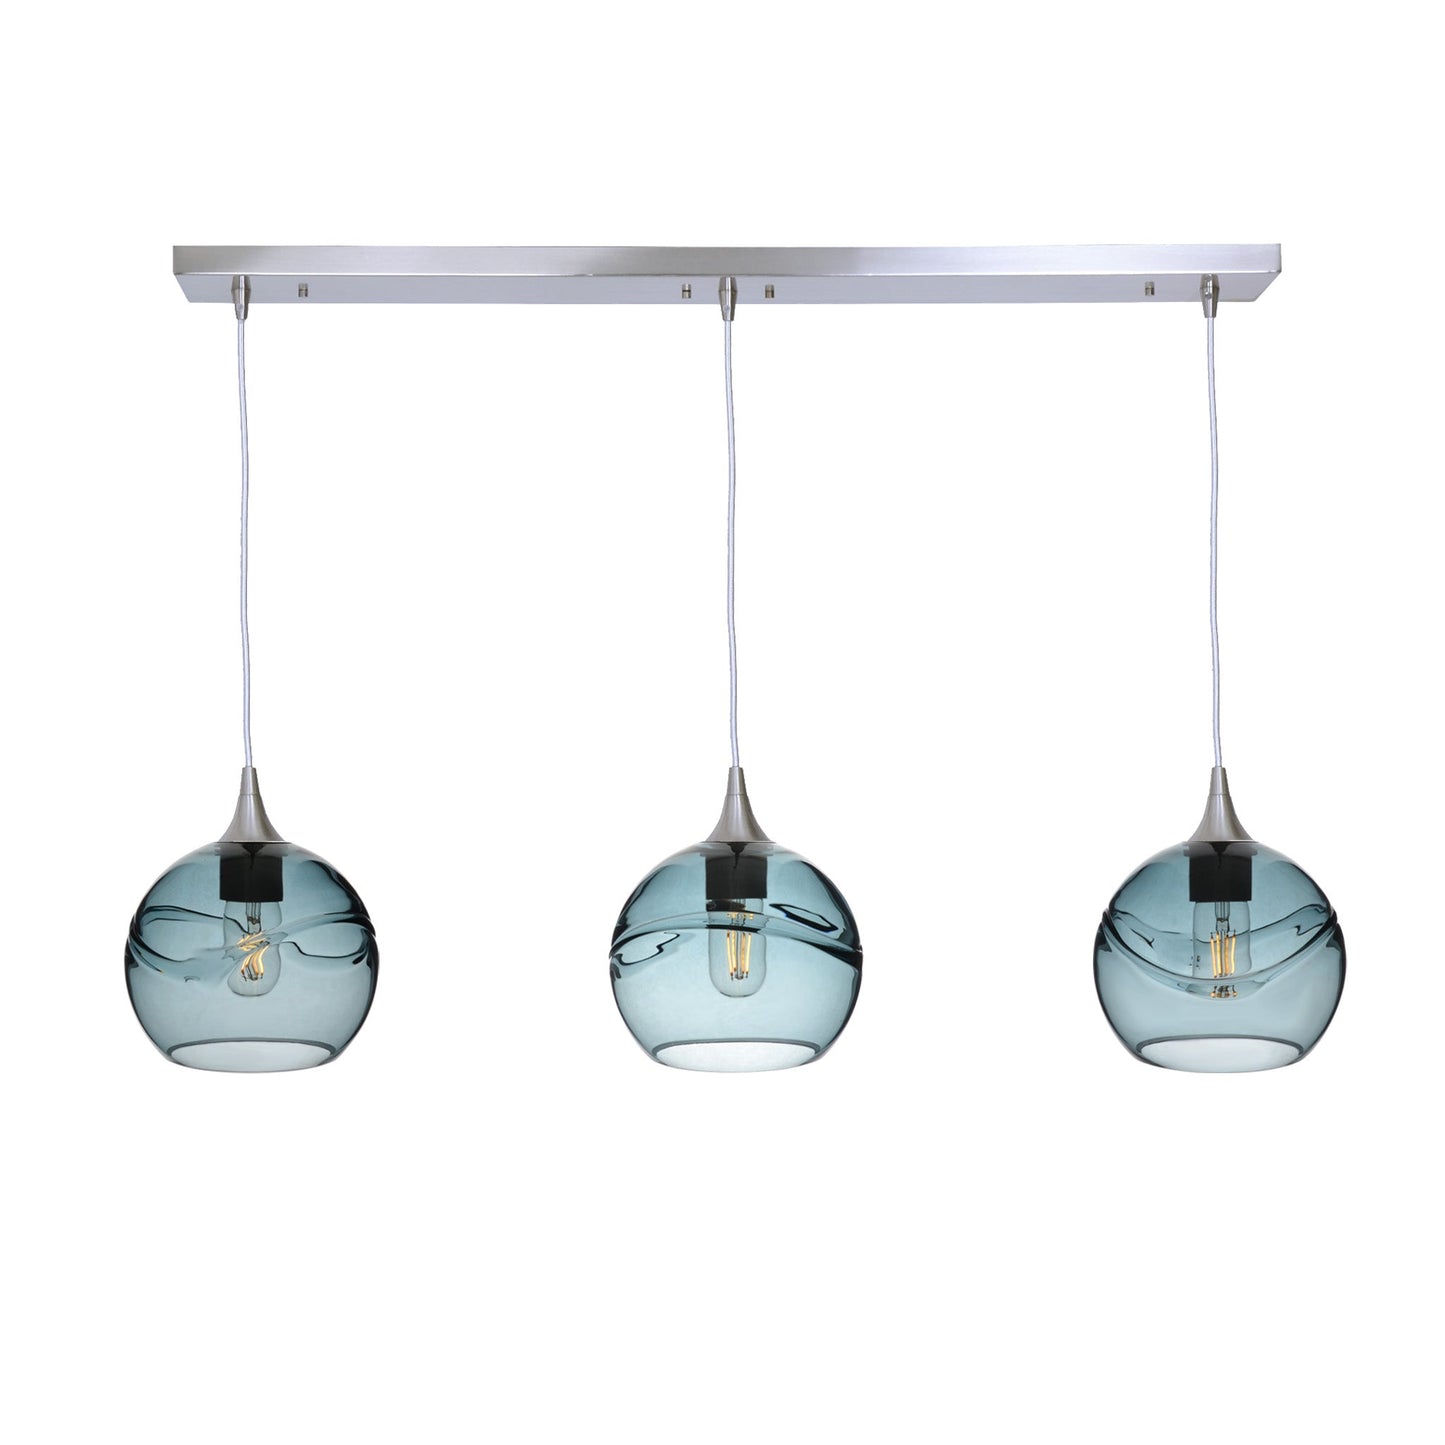 767 Swell: 3 Pendant Linear Chandelier-Glass-Bicycle Glass Co - Hotshop-Slate Gray-Brushed Nickel-Bicycle Glass Co